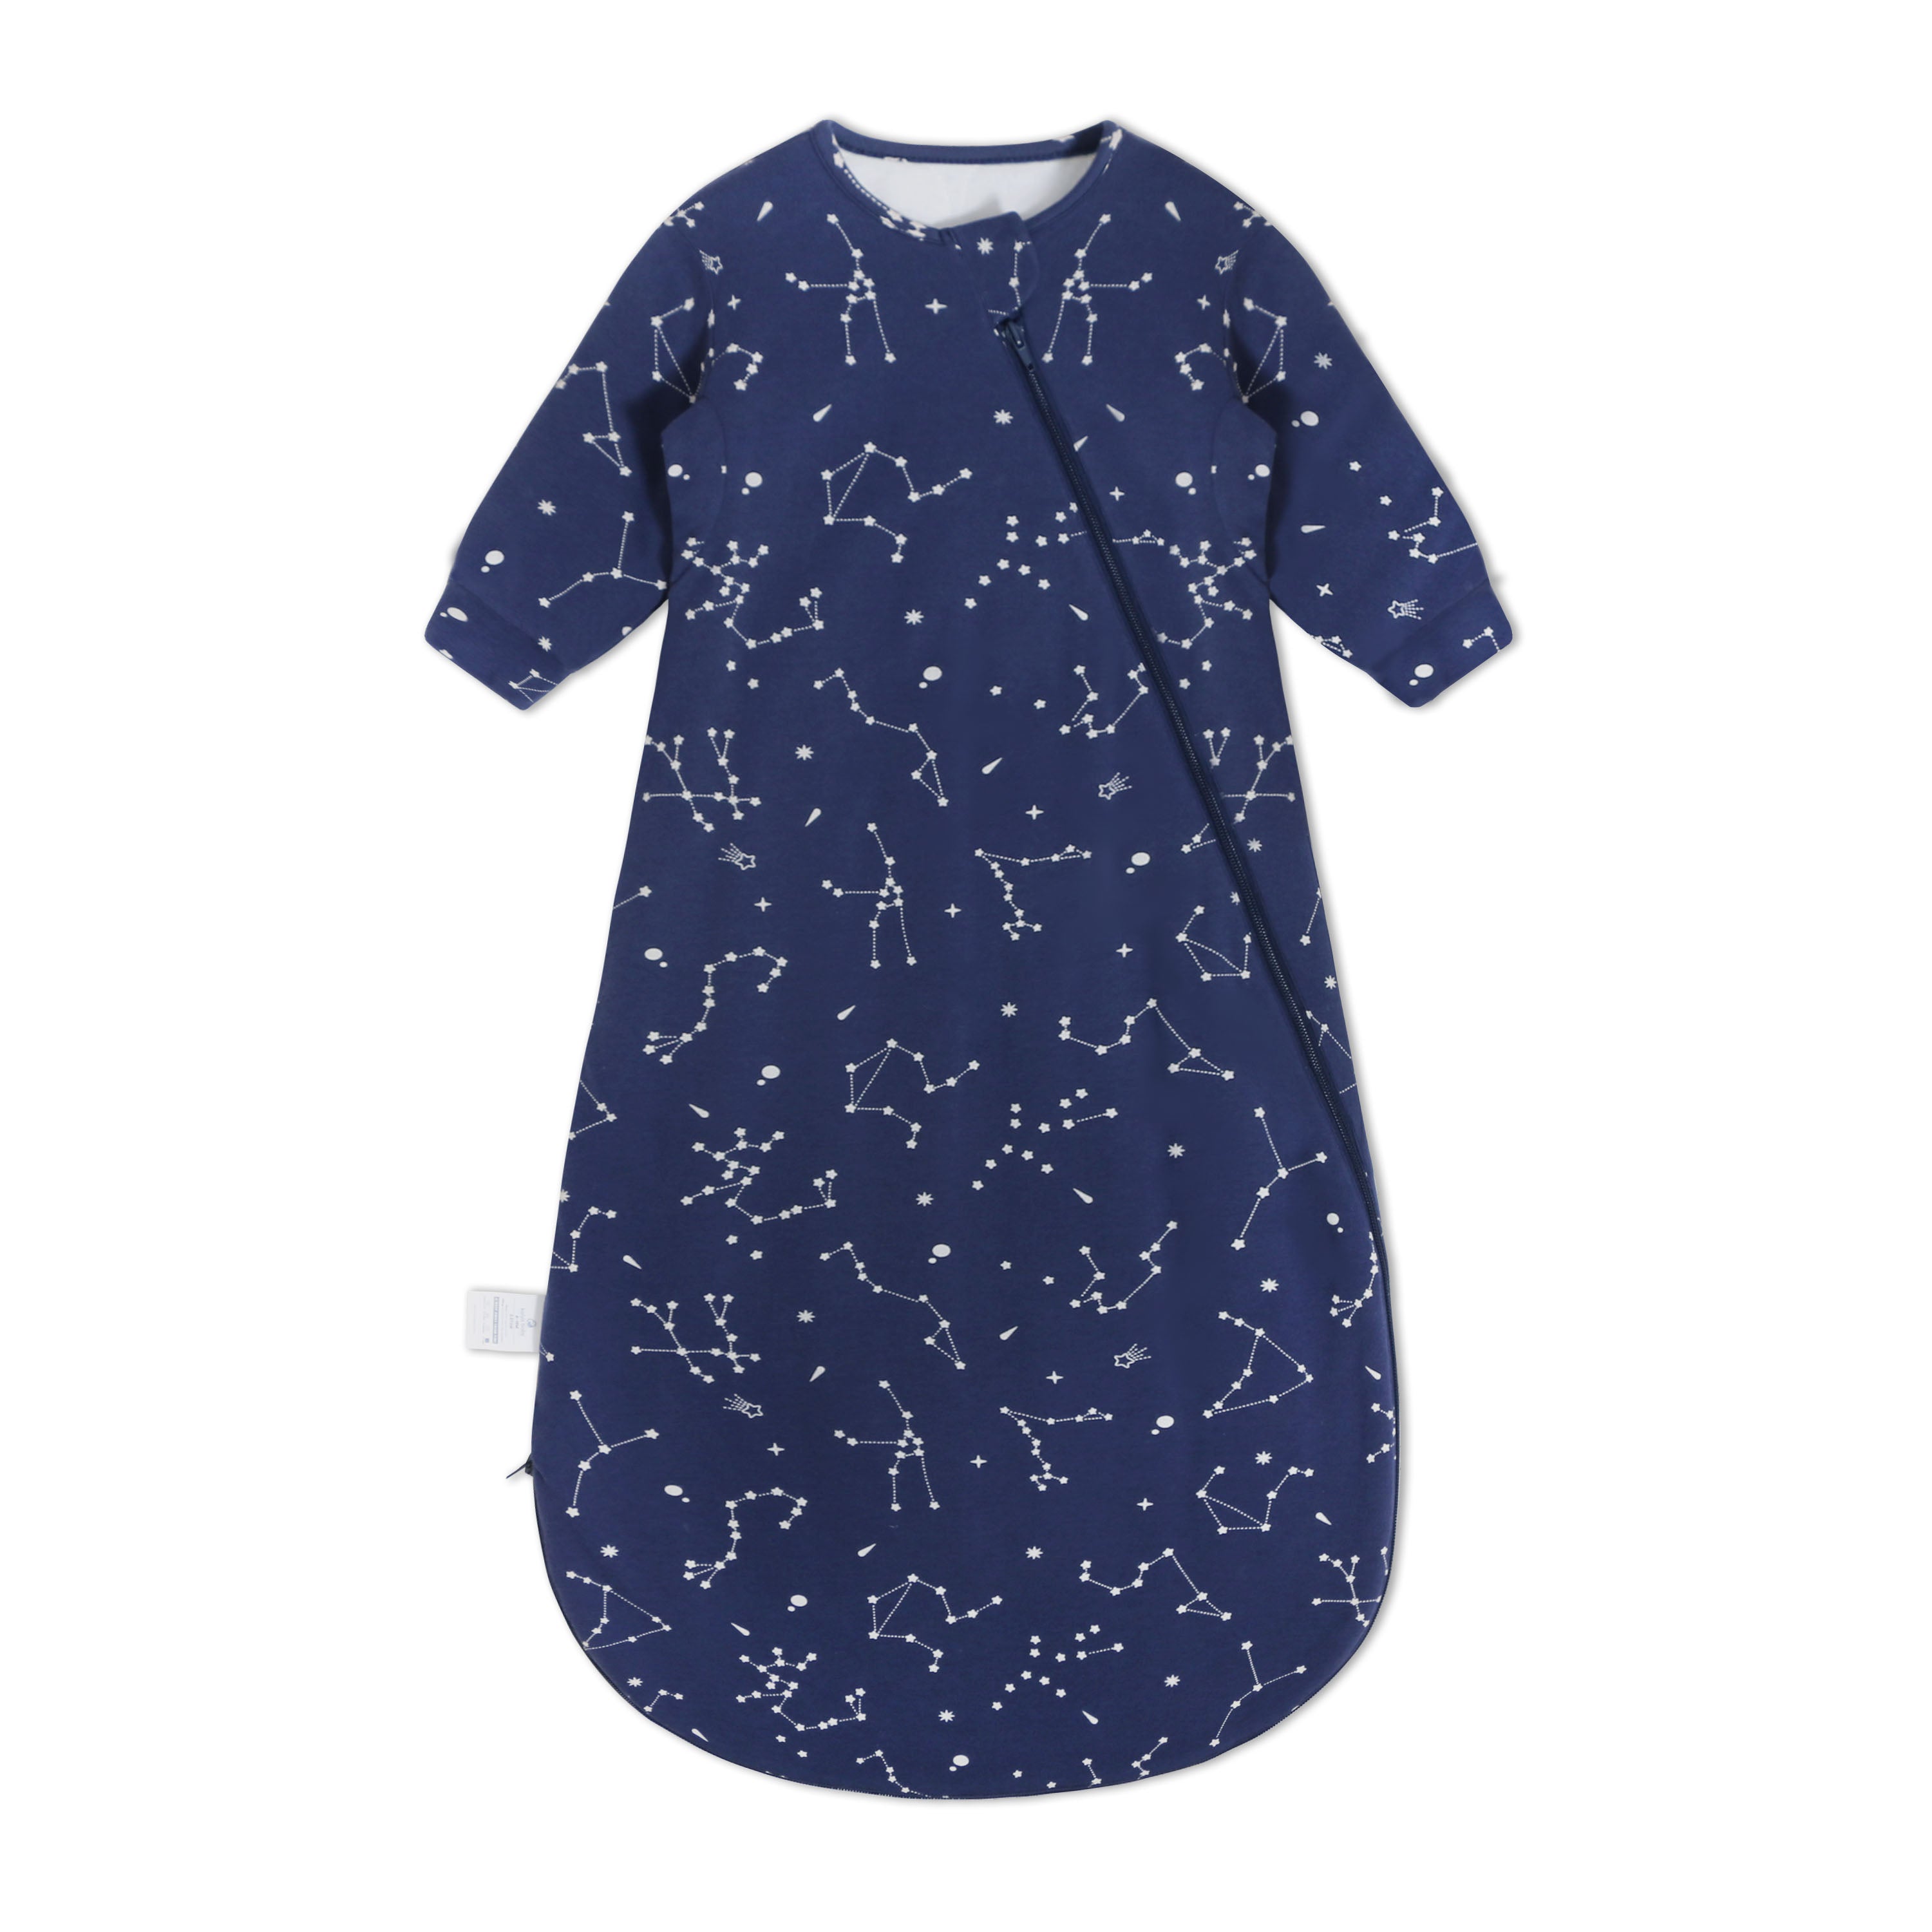 Organic Cotton & Camel Wool Winter Sleep Sack With Arms 3.5 TOG - Constellation